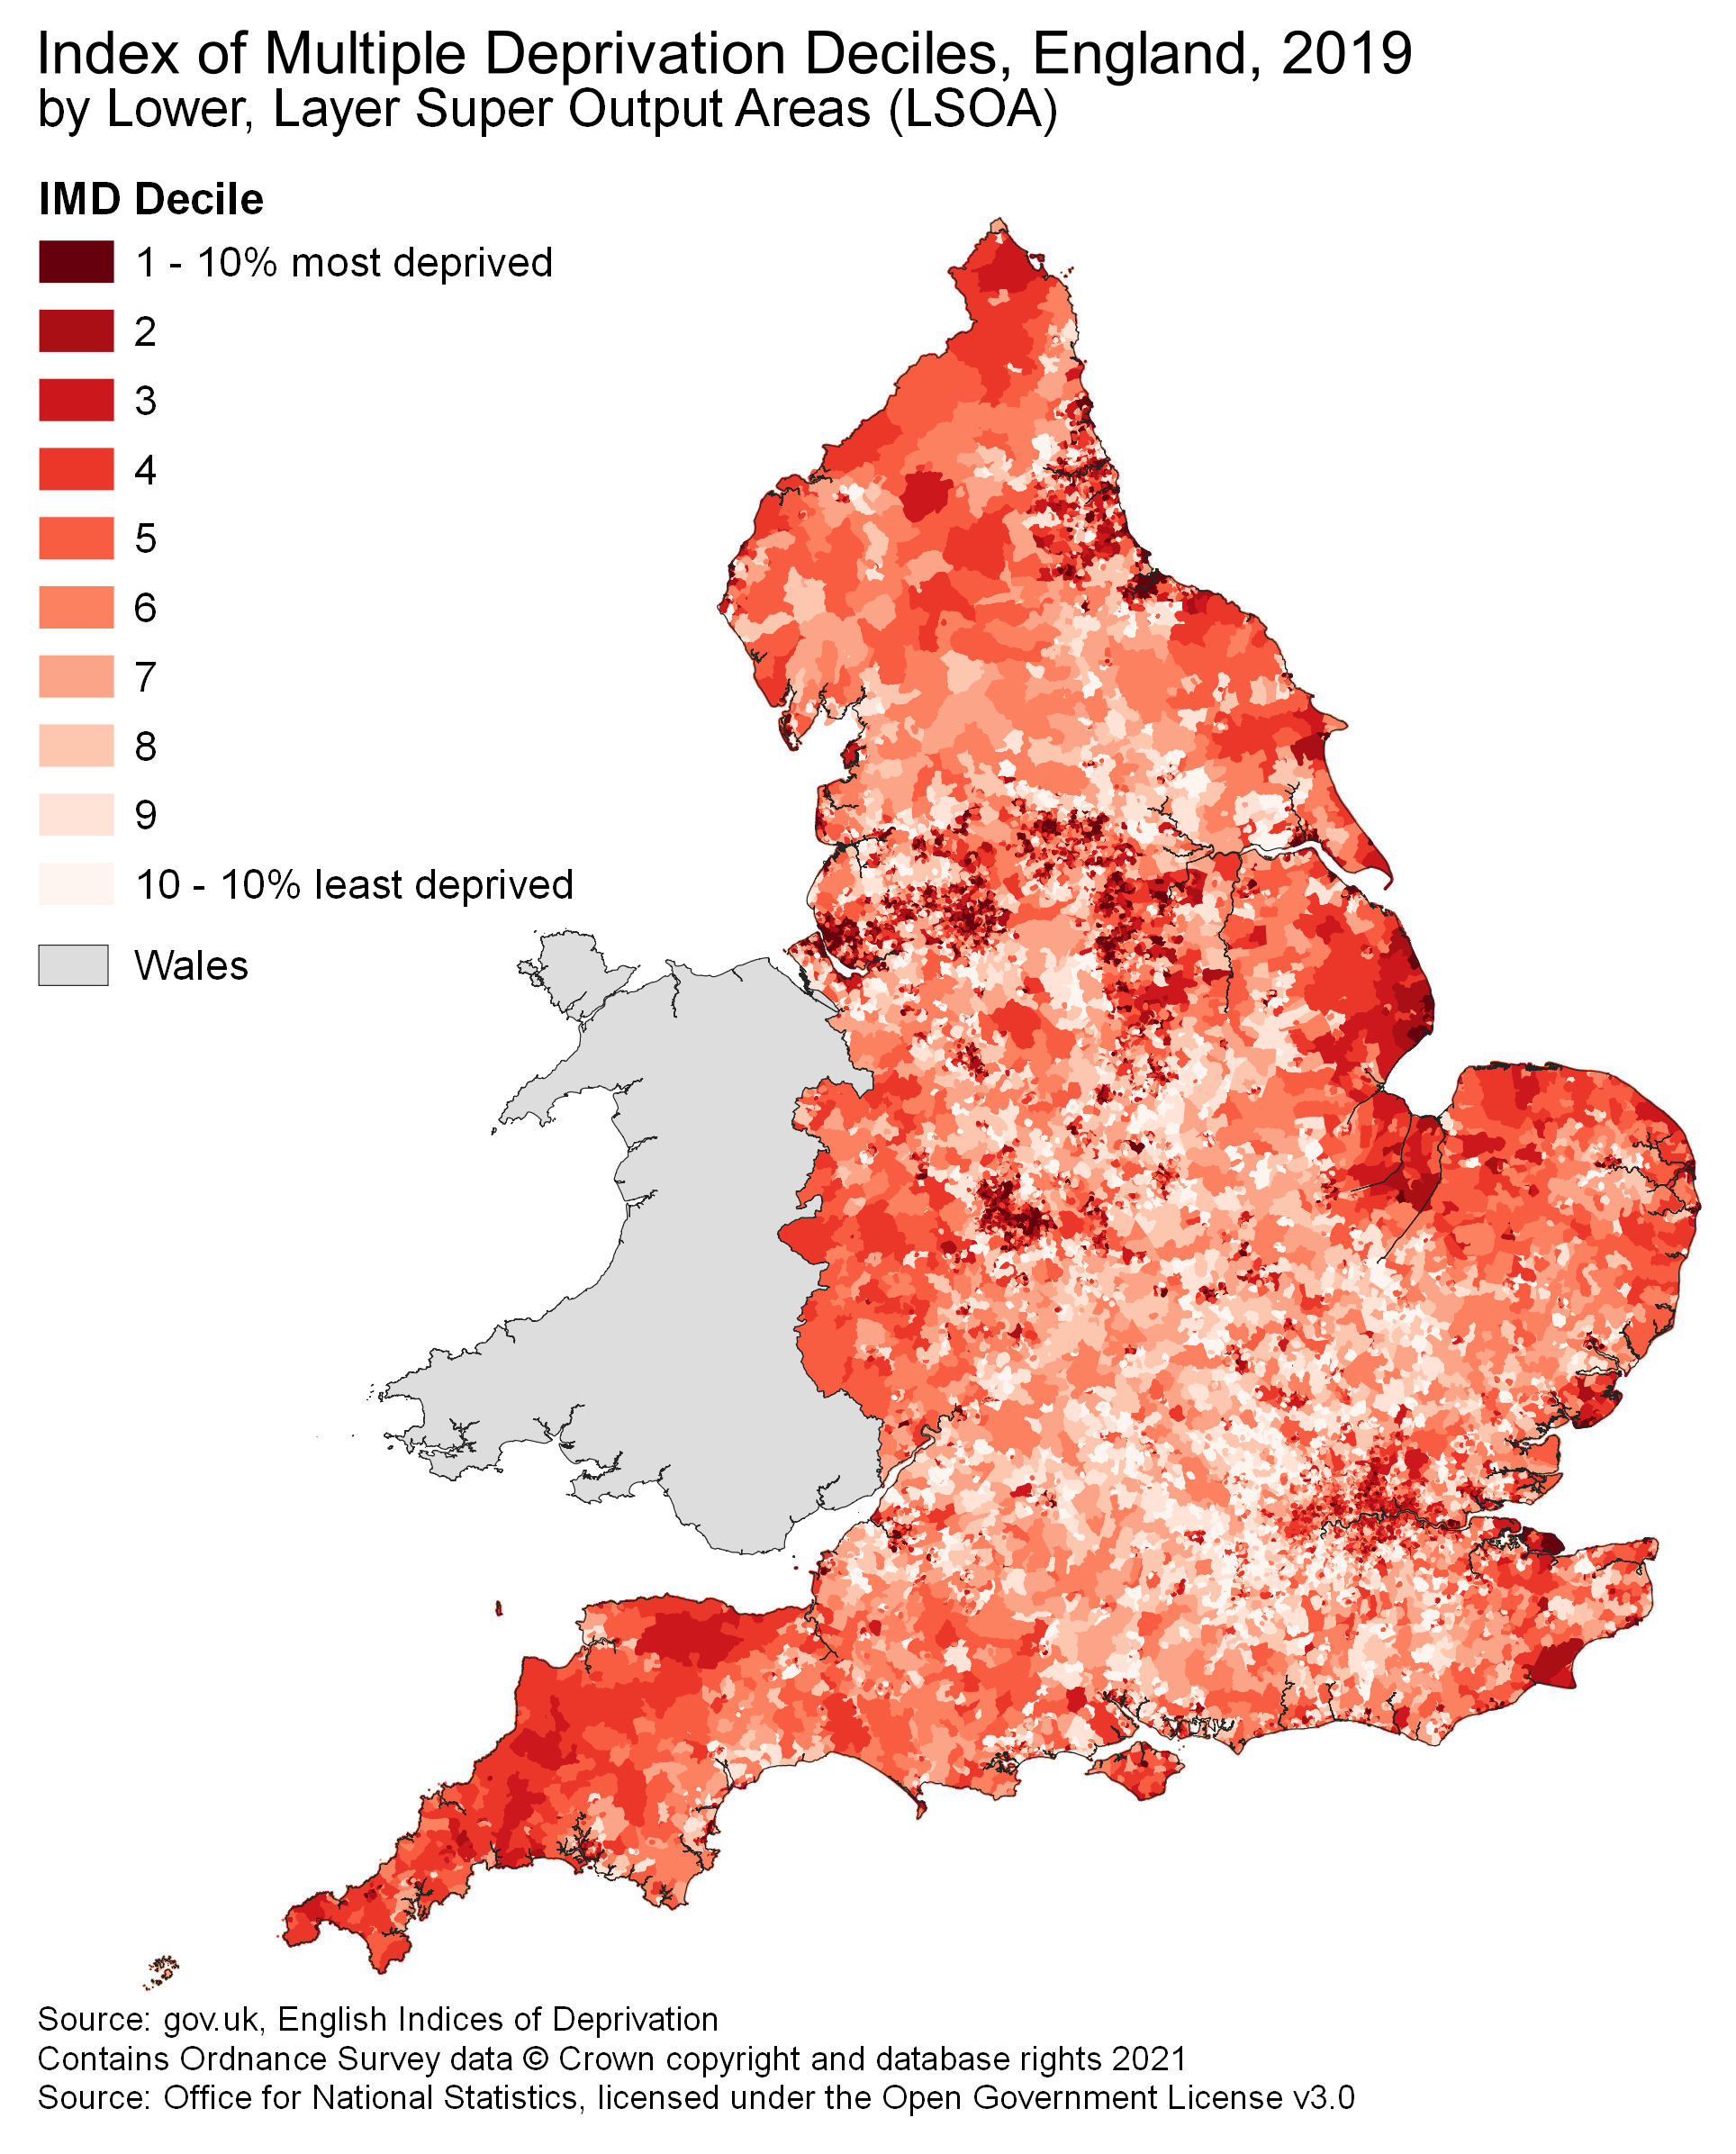 A good version of a map showing IMD Deciles, England.